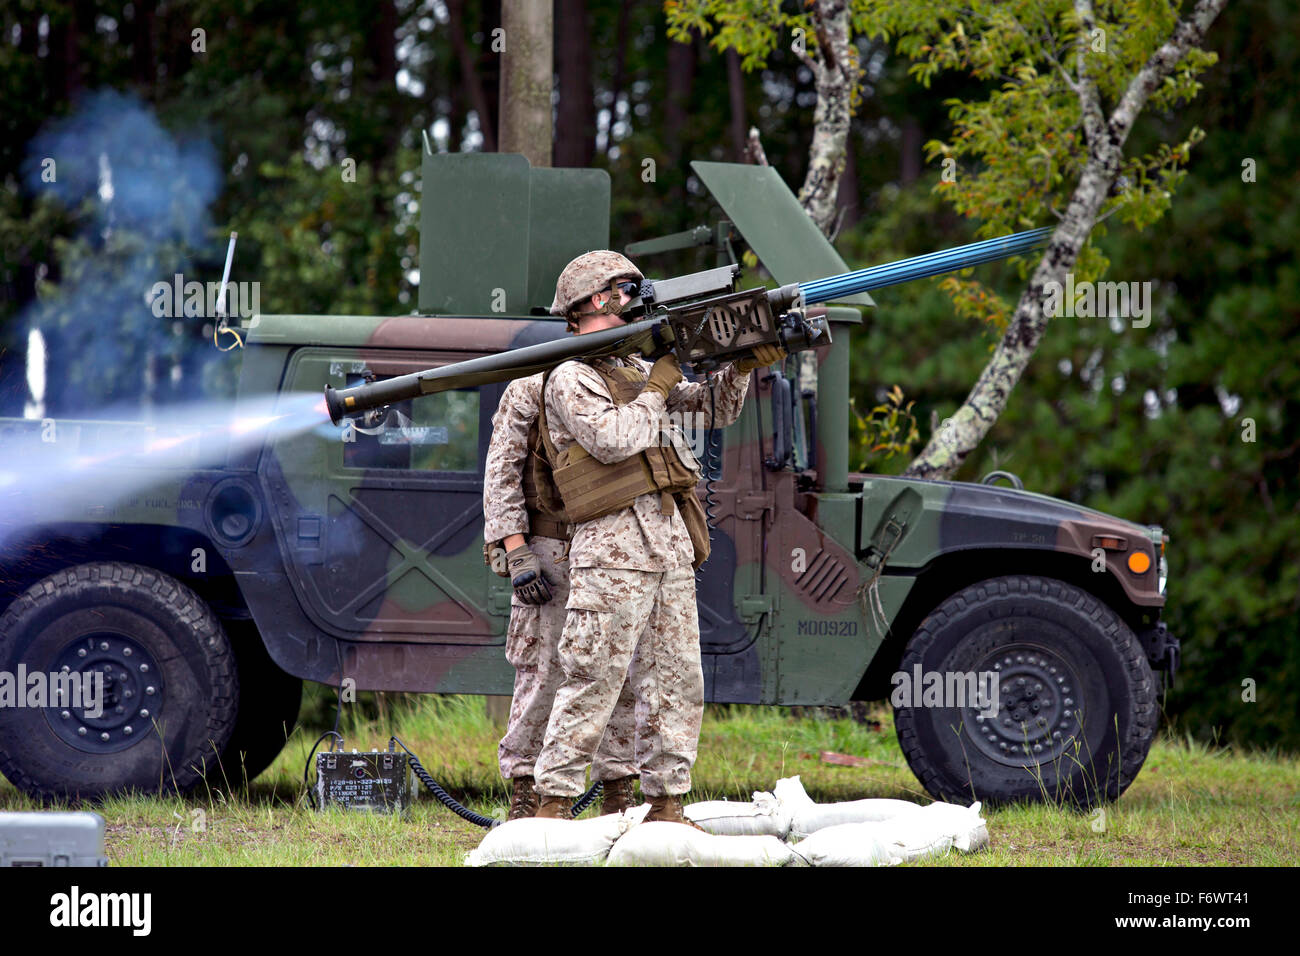 U.S. Marines fire a Stinger shoulder launched anti-aircraft missile during familiarization training at Marine Corps Air Station Cherry Point September 24, 2015 in Cherry Point, North Carolina. Stock Photo